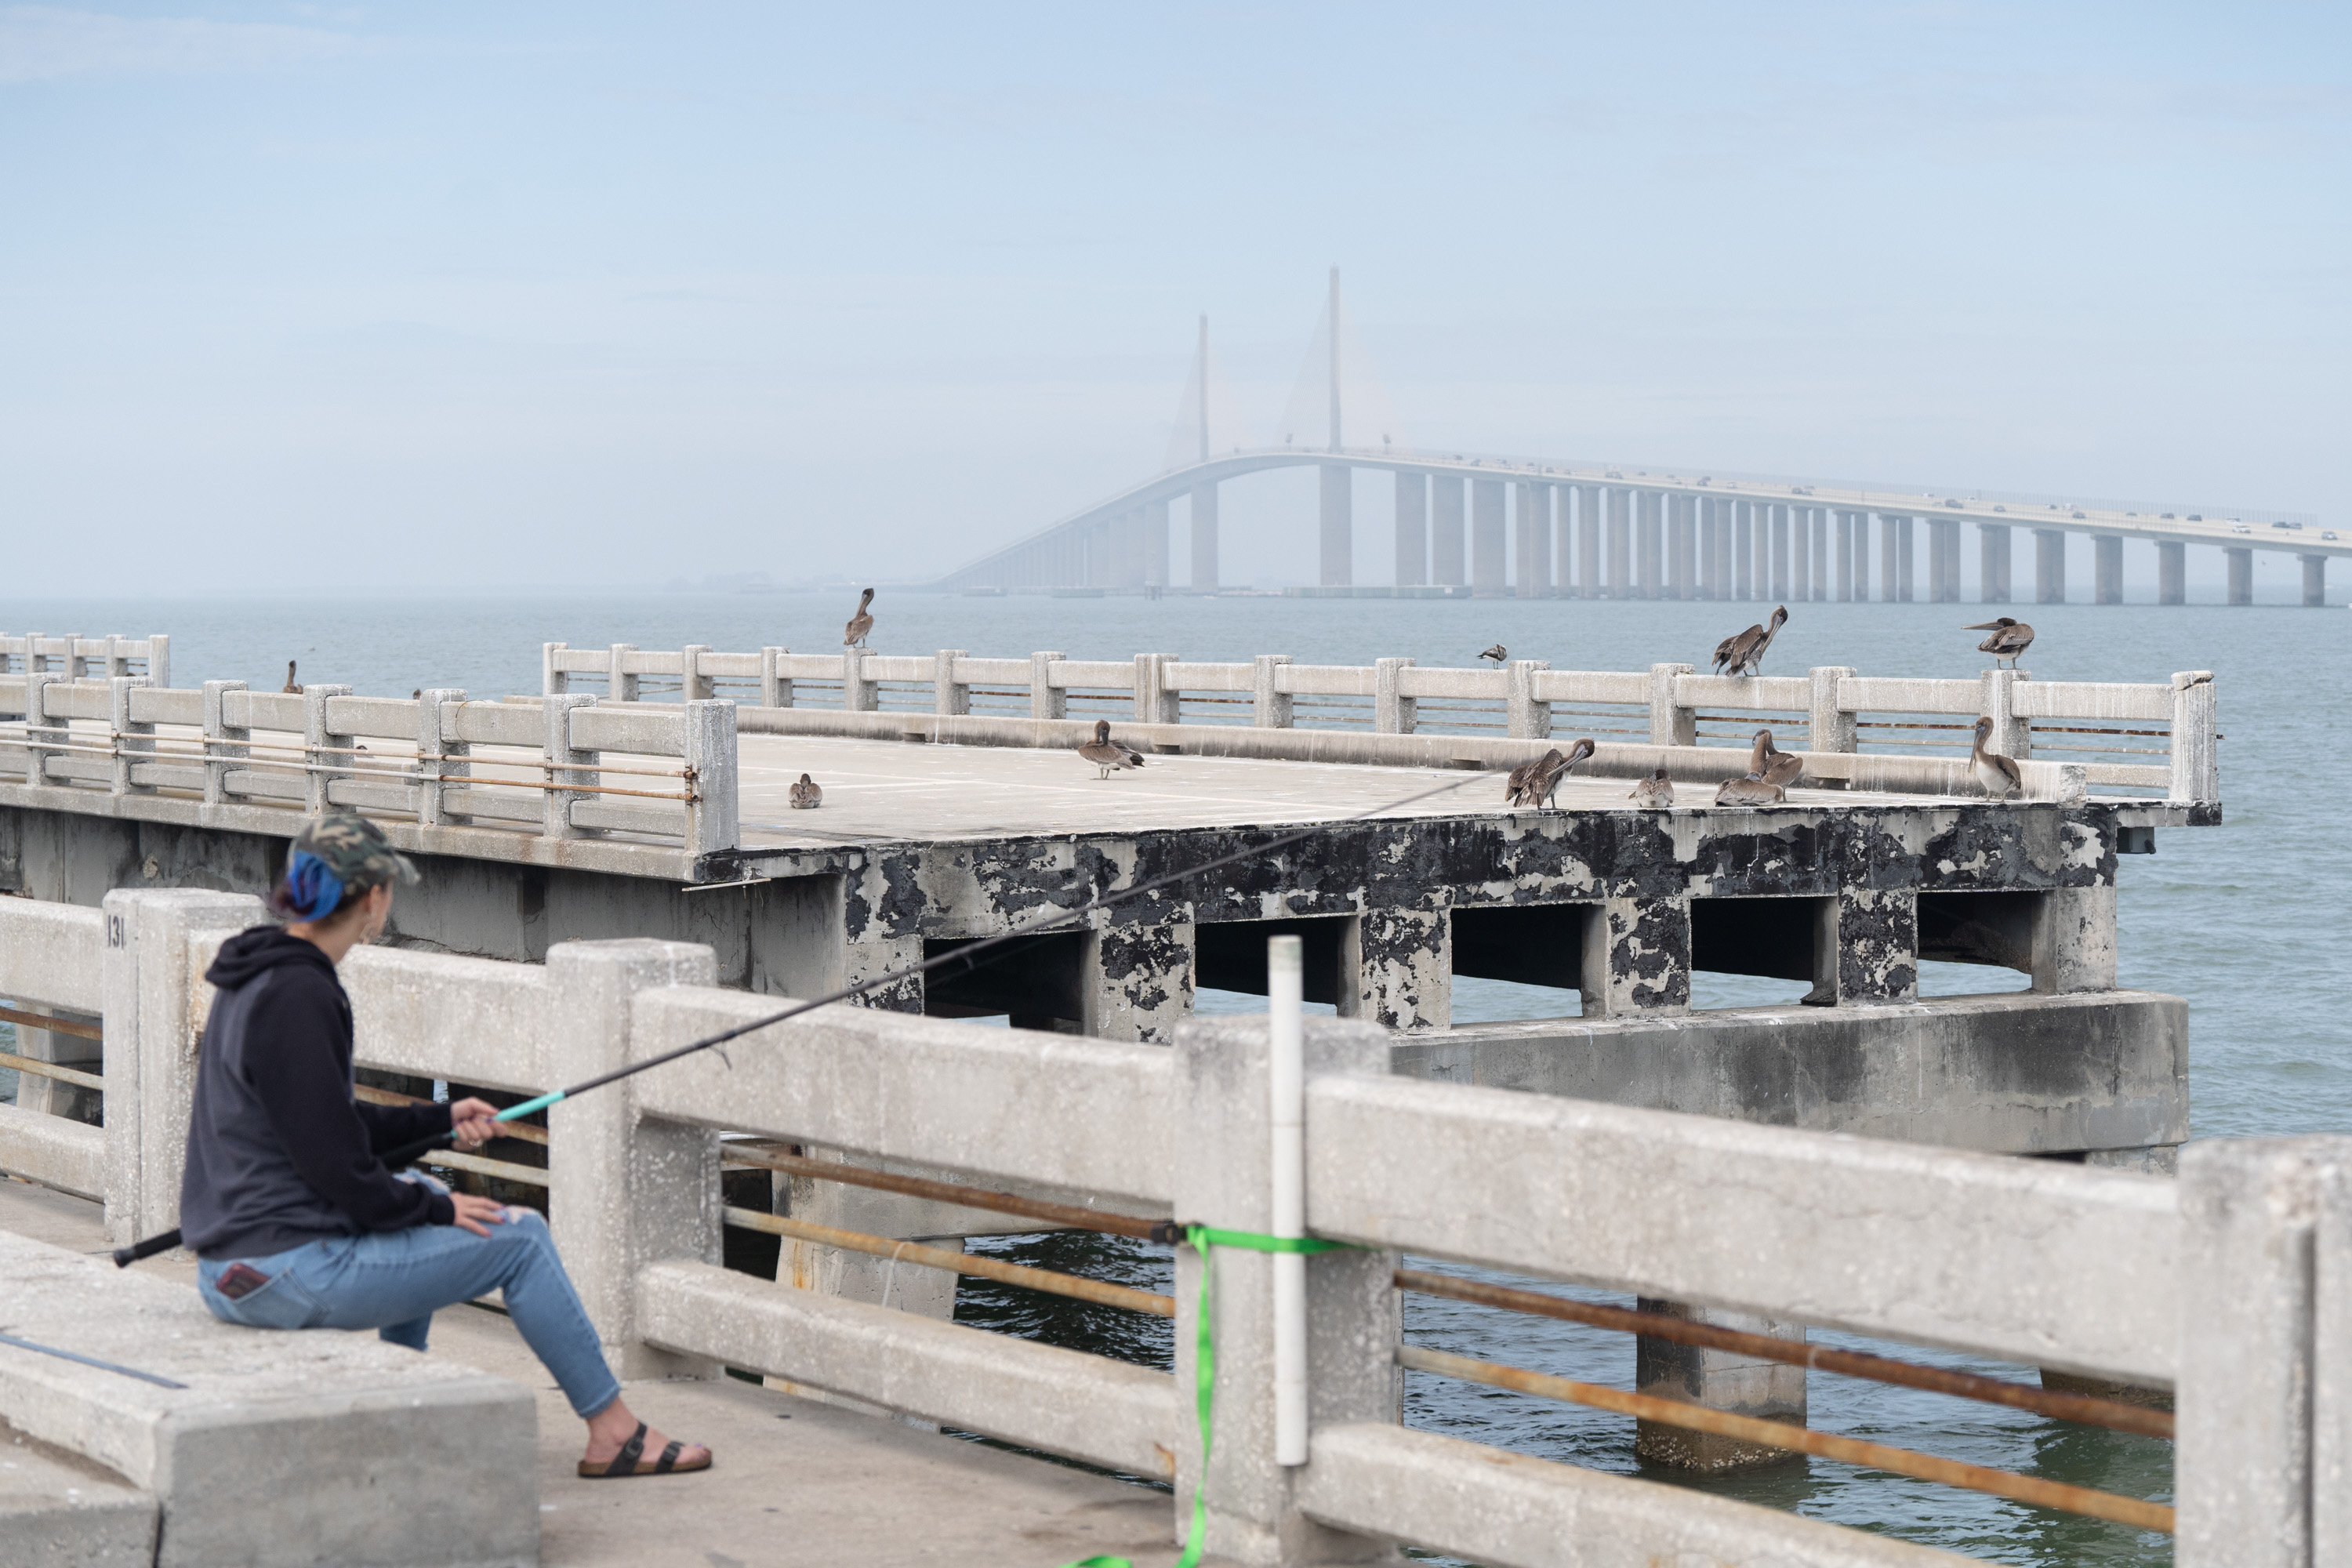 Want to fish at Skyway Pier? New rules may be coming for anglers